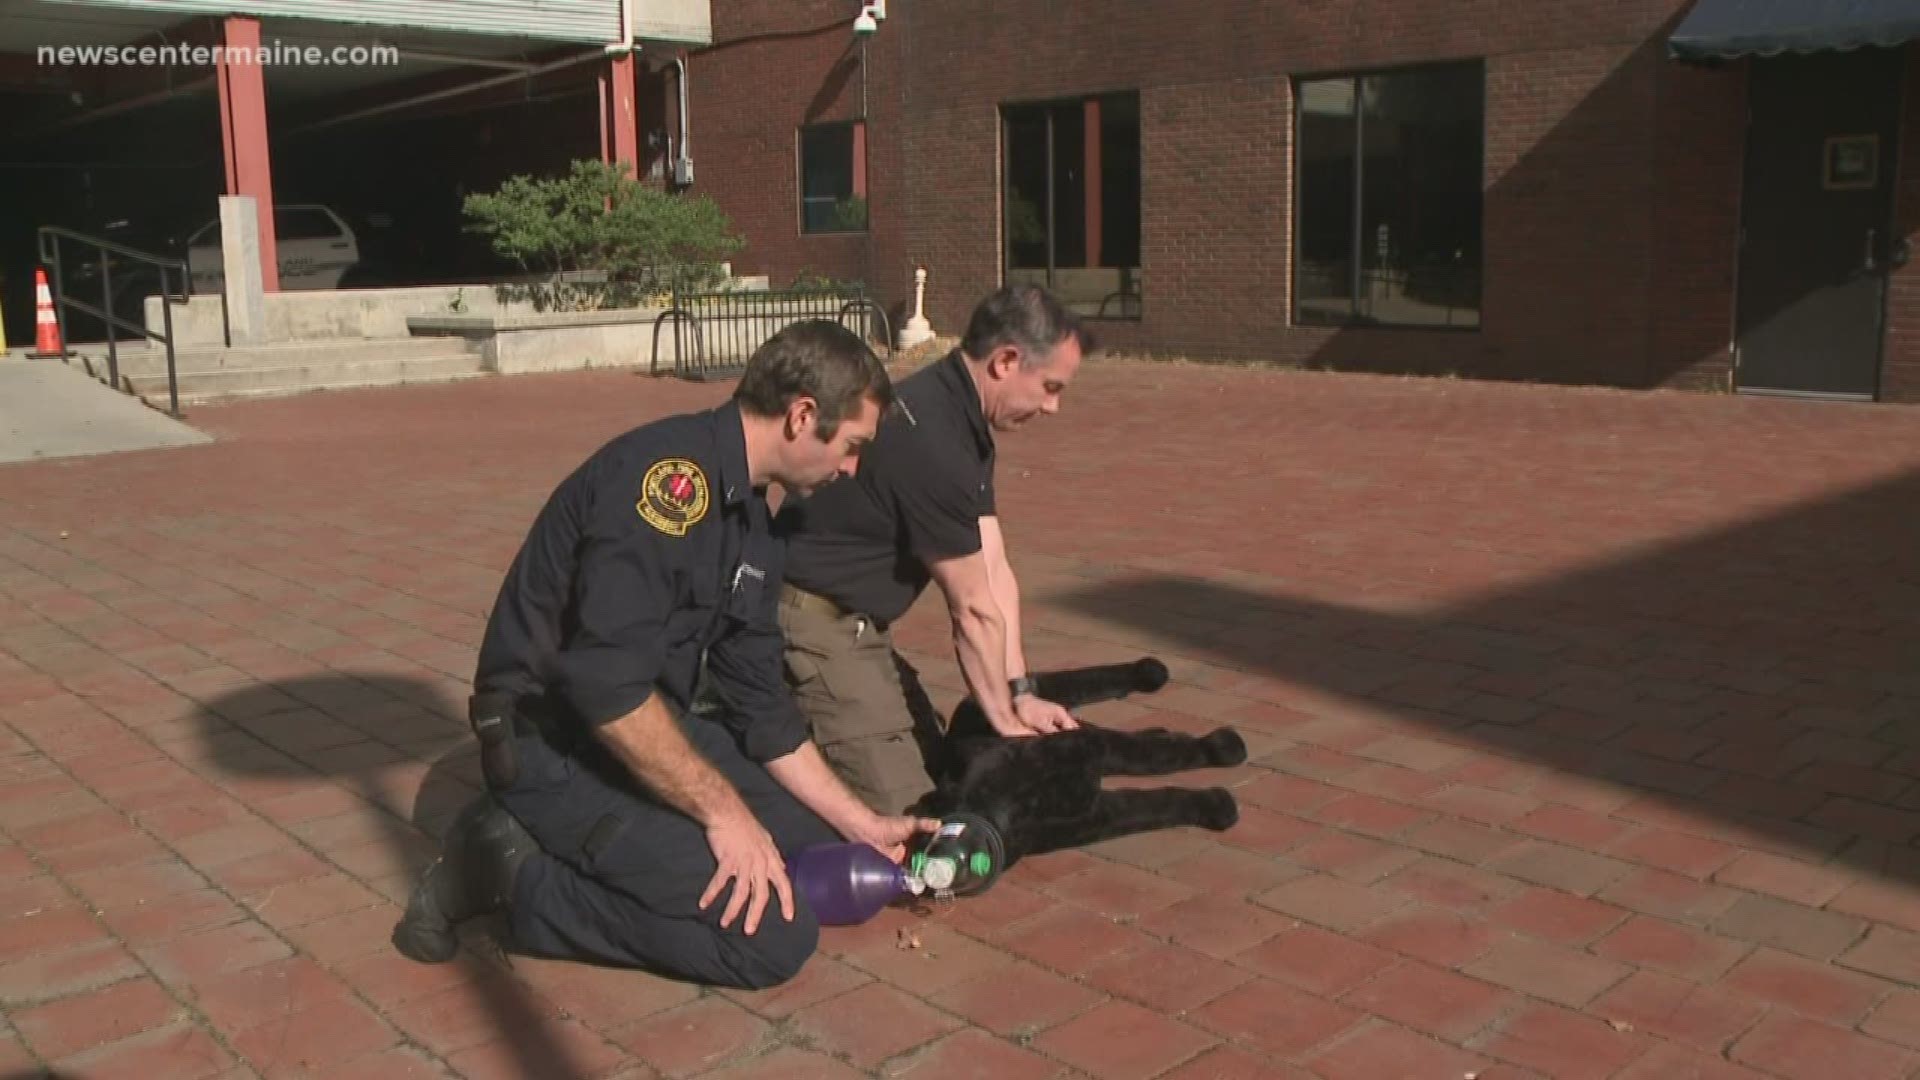 The K-9s are often the first line of defense in police work.